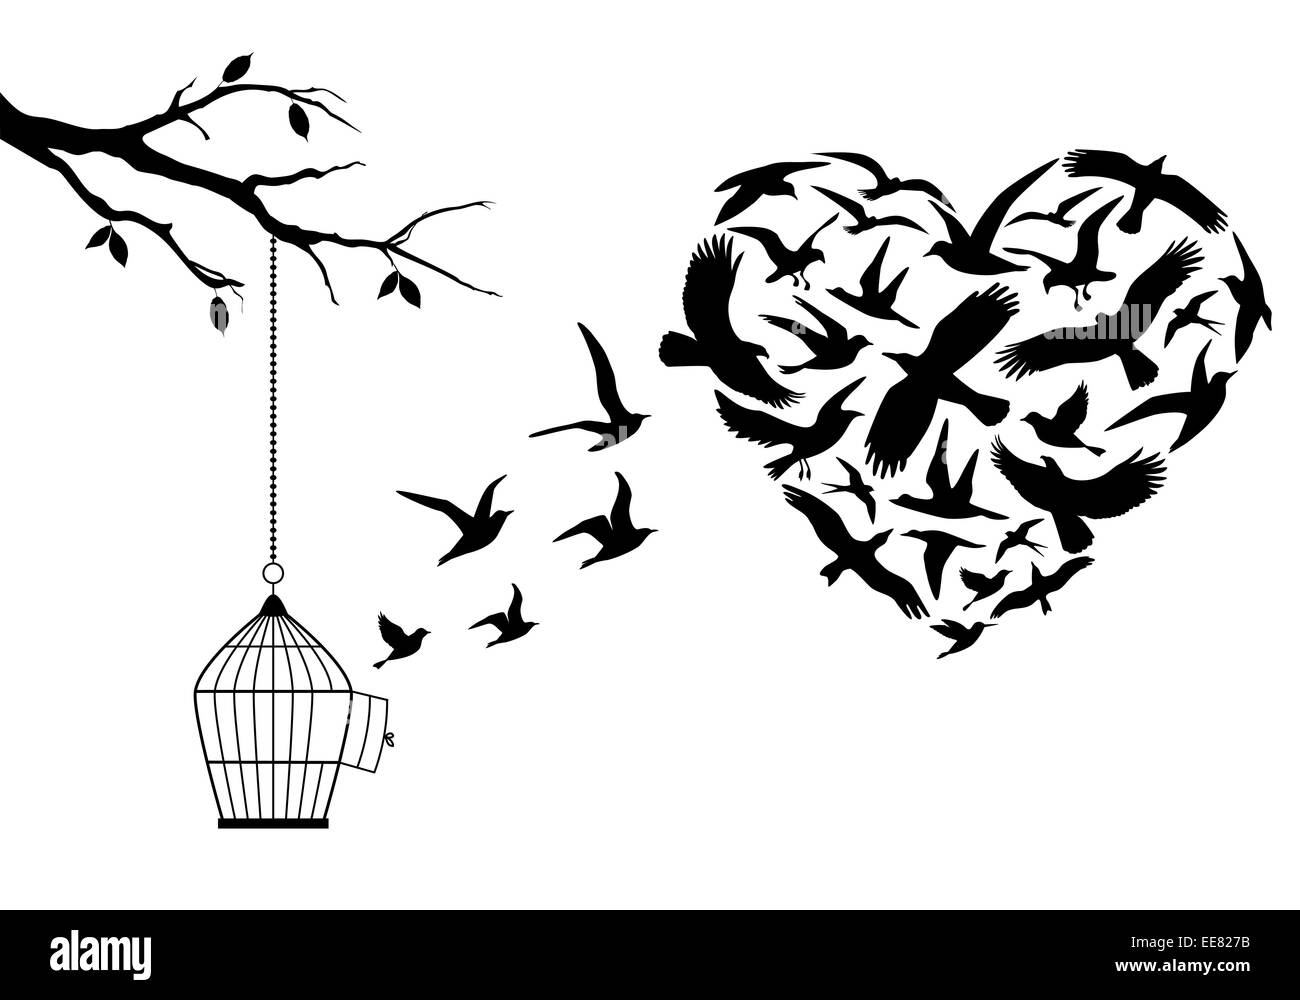 flying birds in heart shape with birdcage and tree Stock Photo